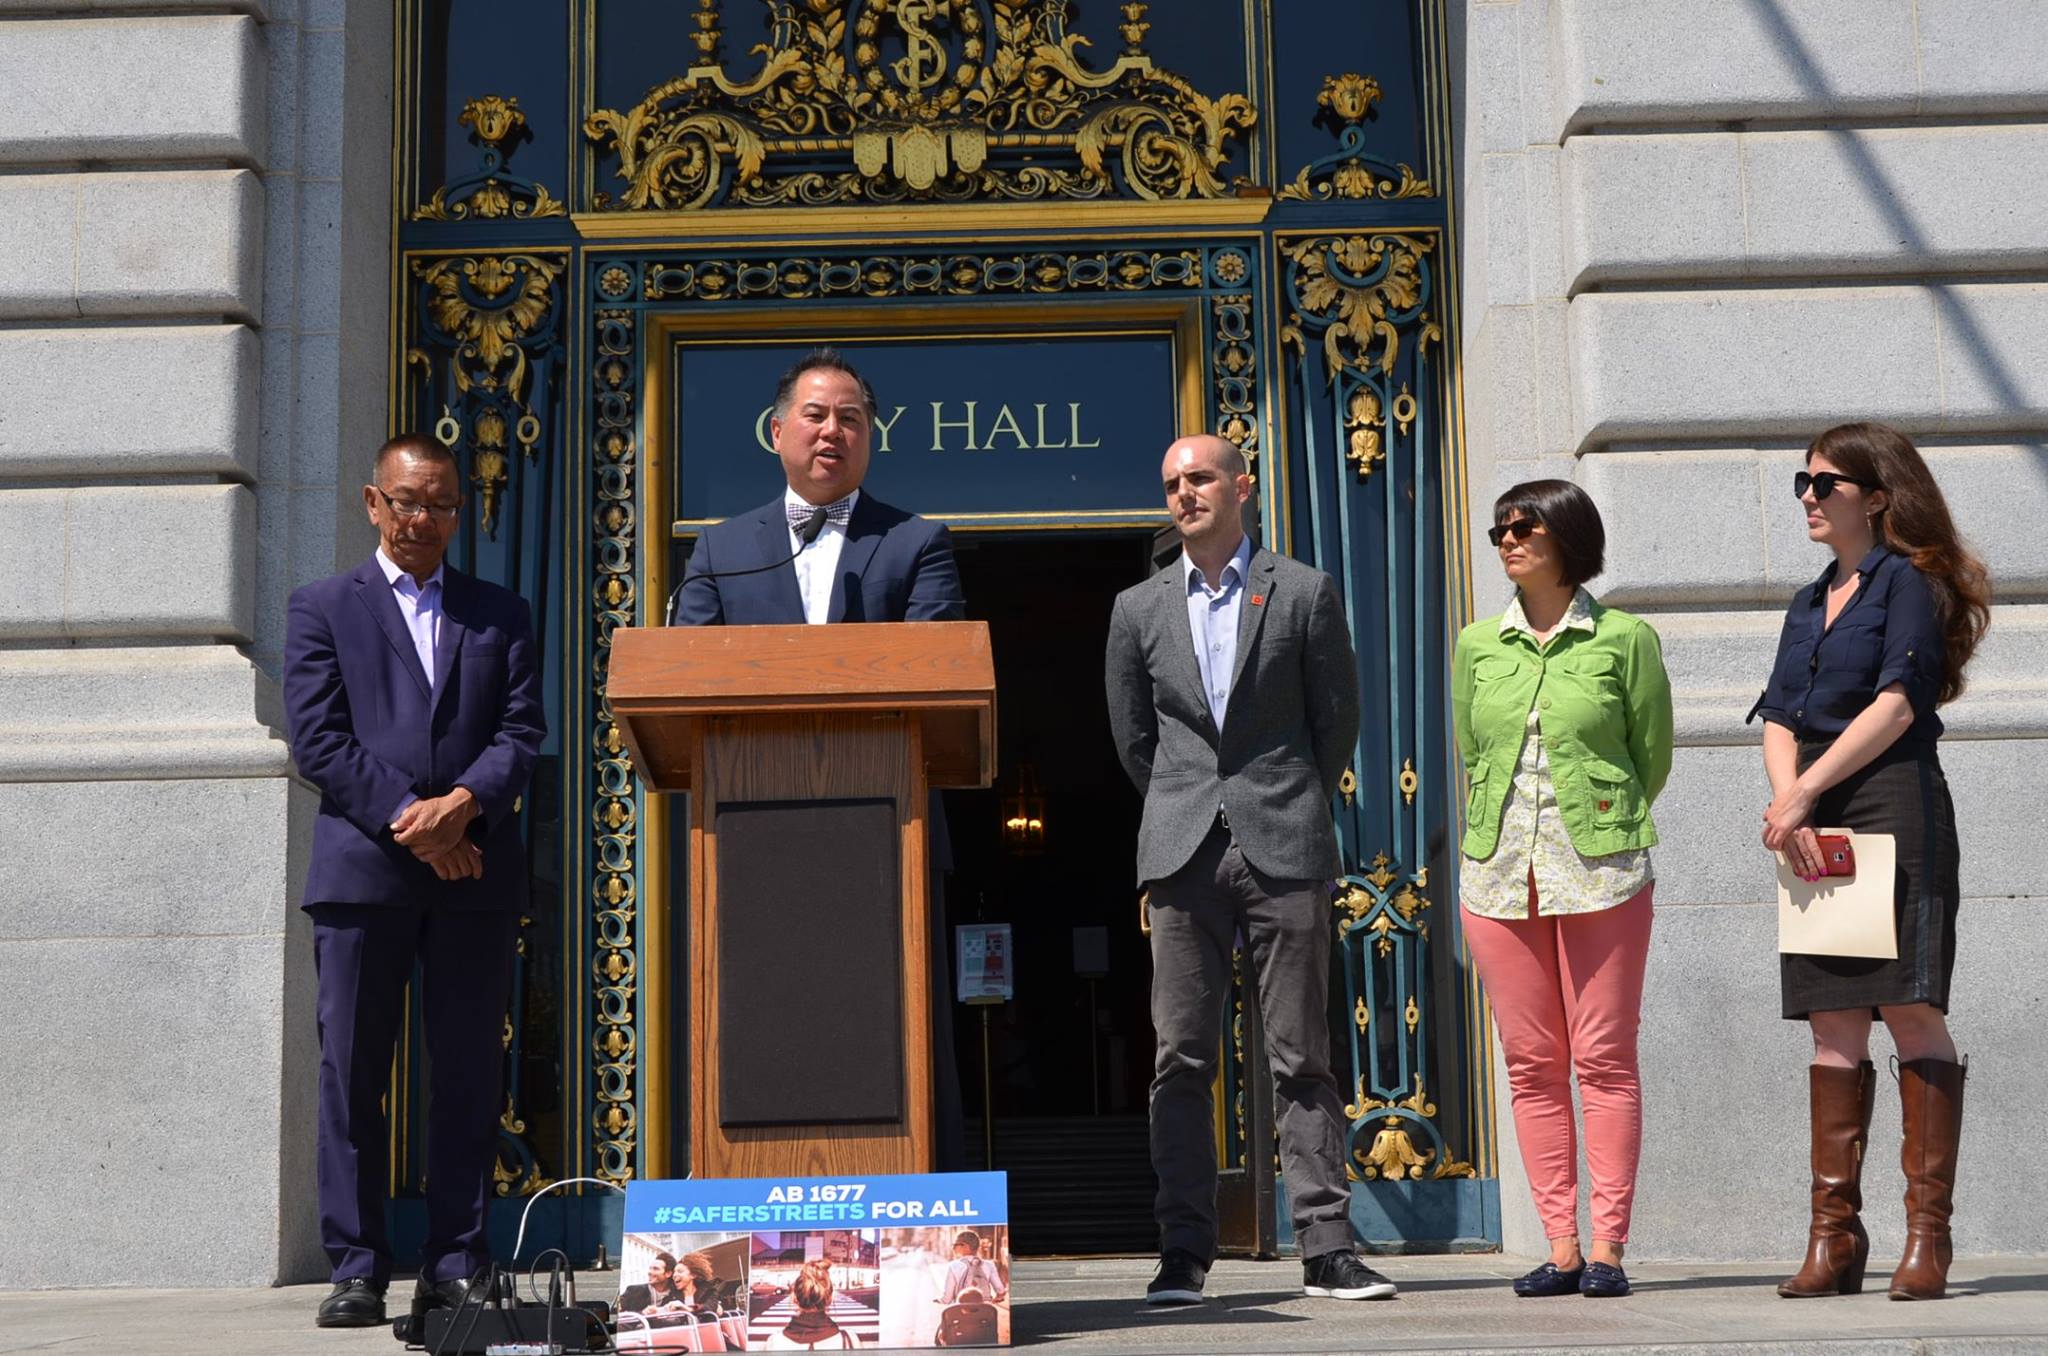 Tour bus safety reform: City Hall press conference